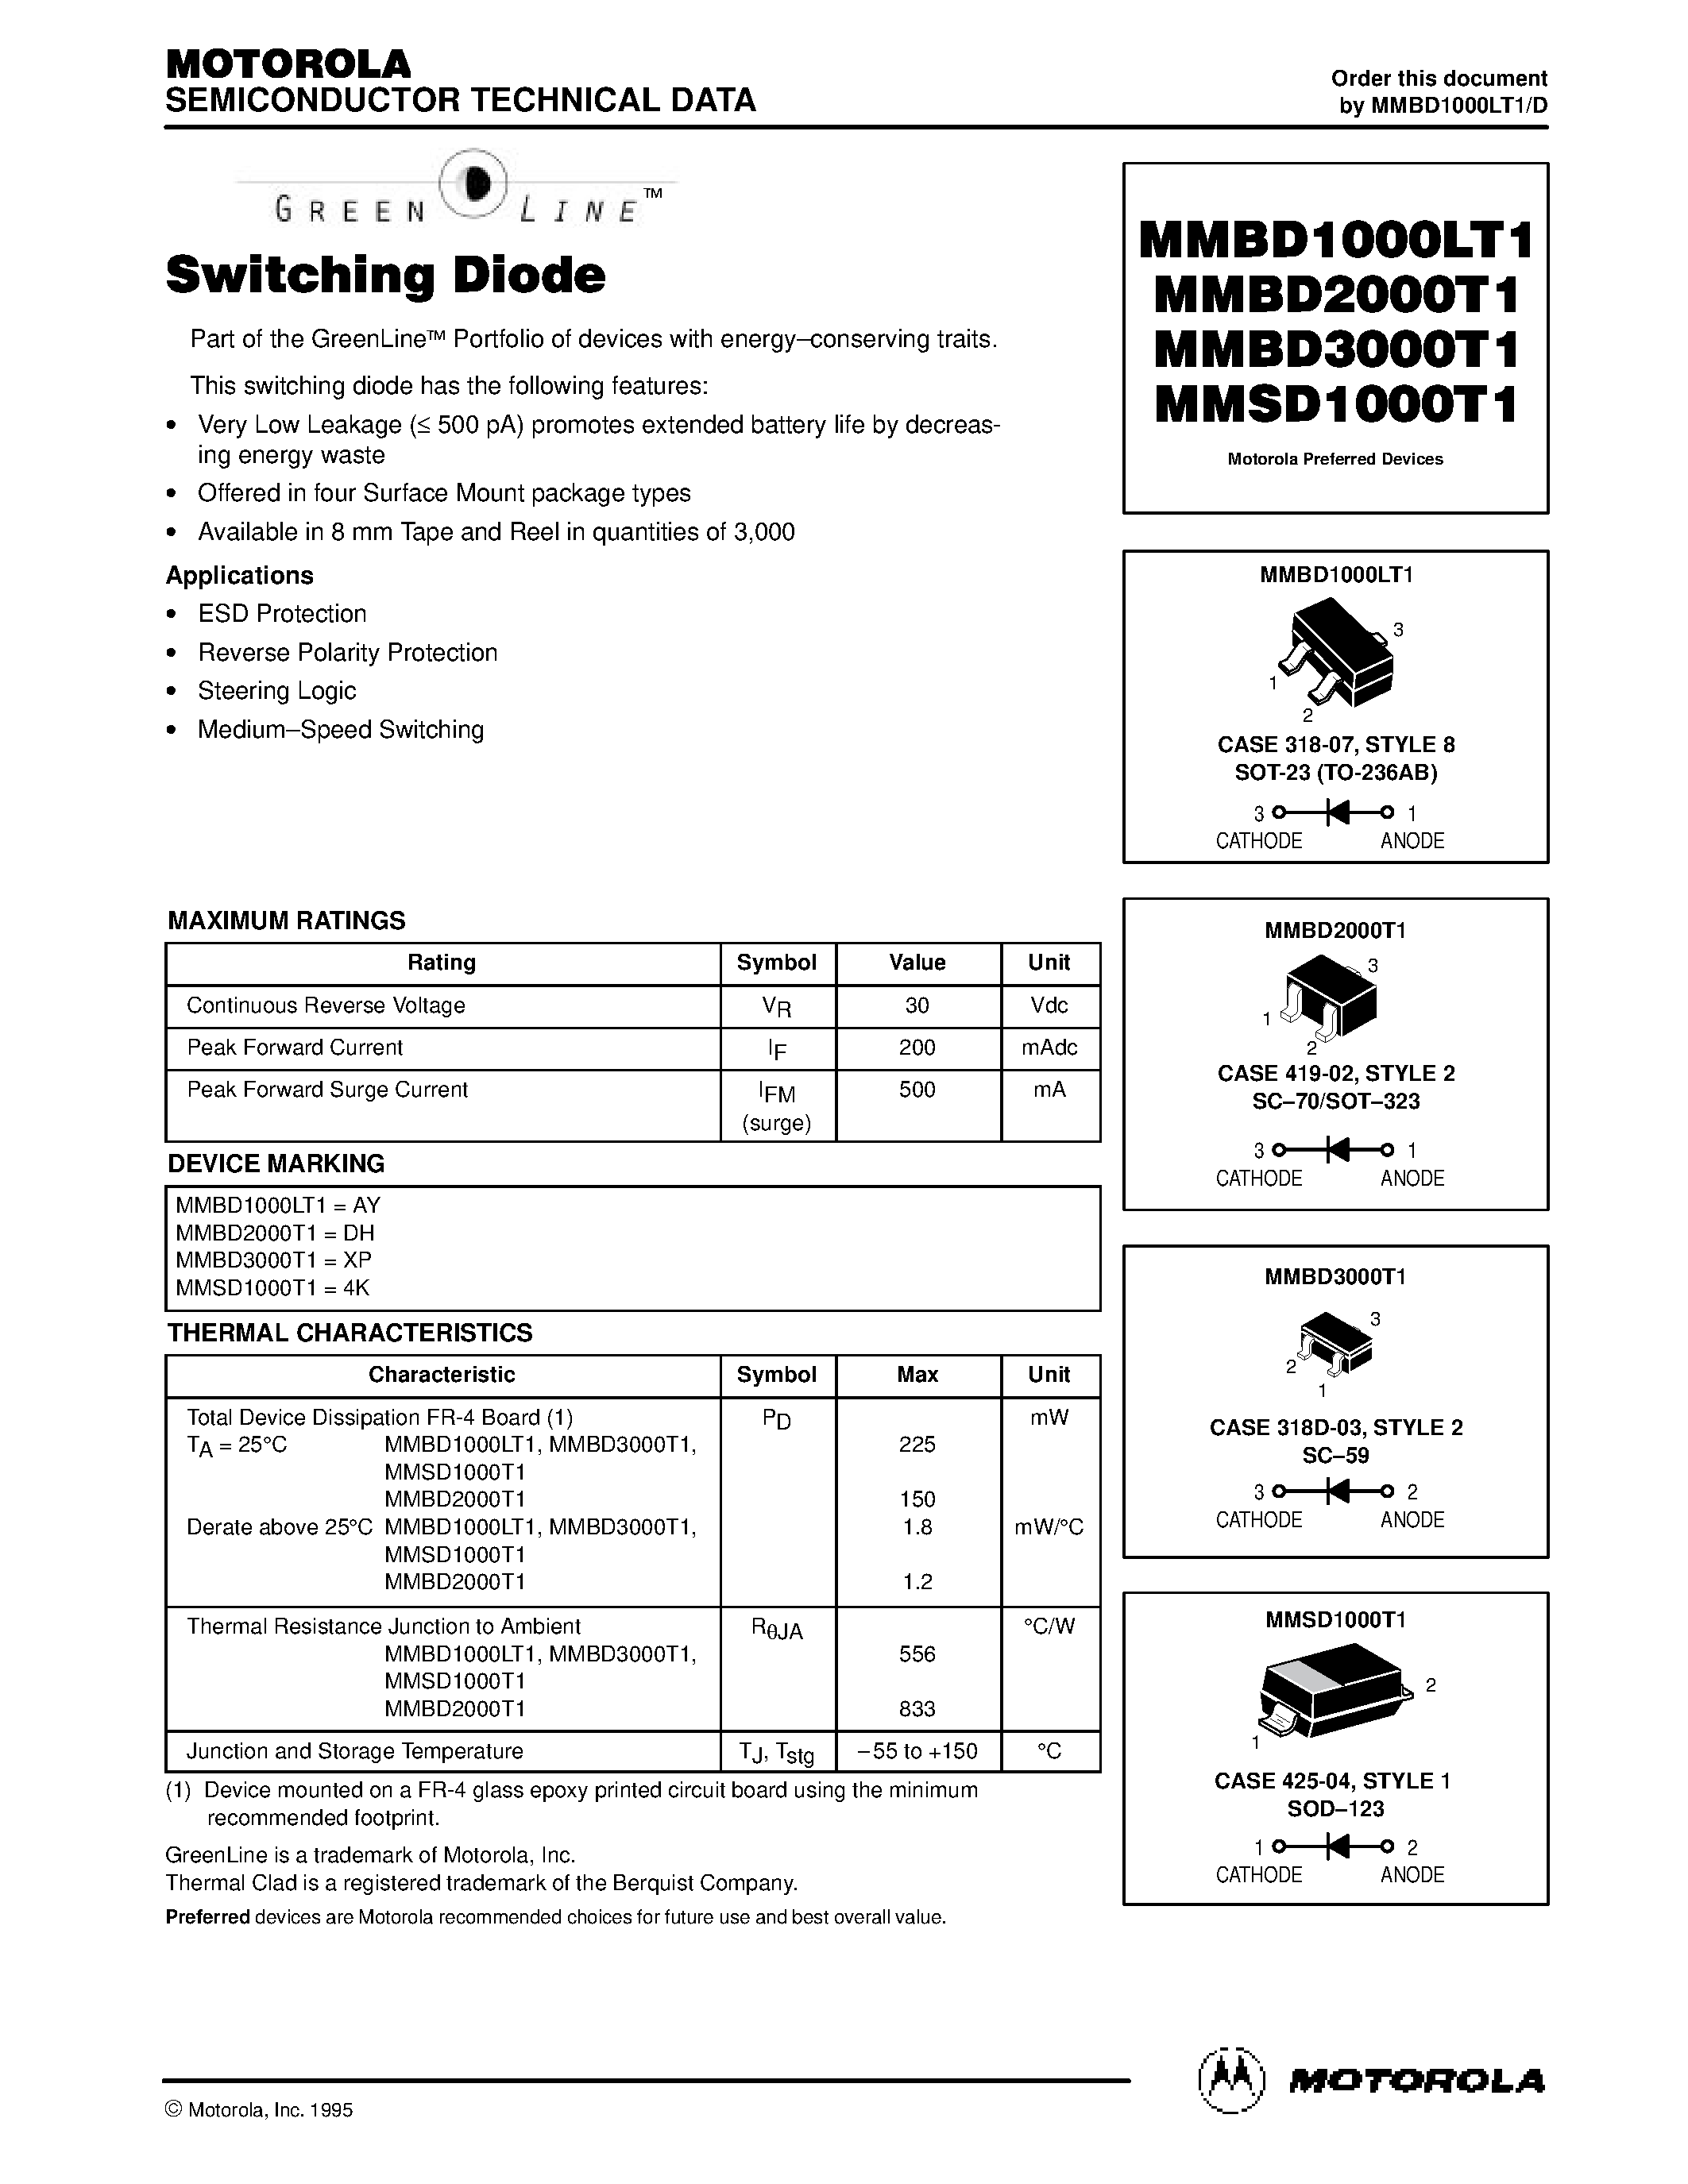 Datasheet MMBD1000LT1 - Switching Diode page 1